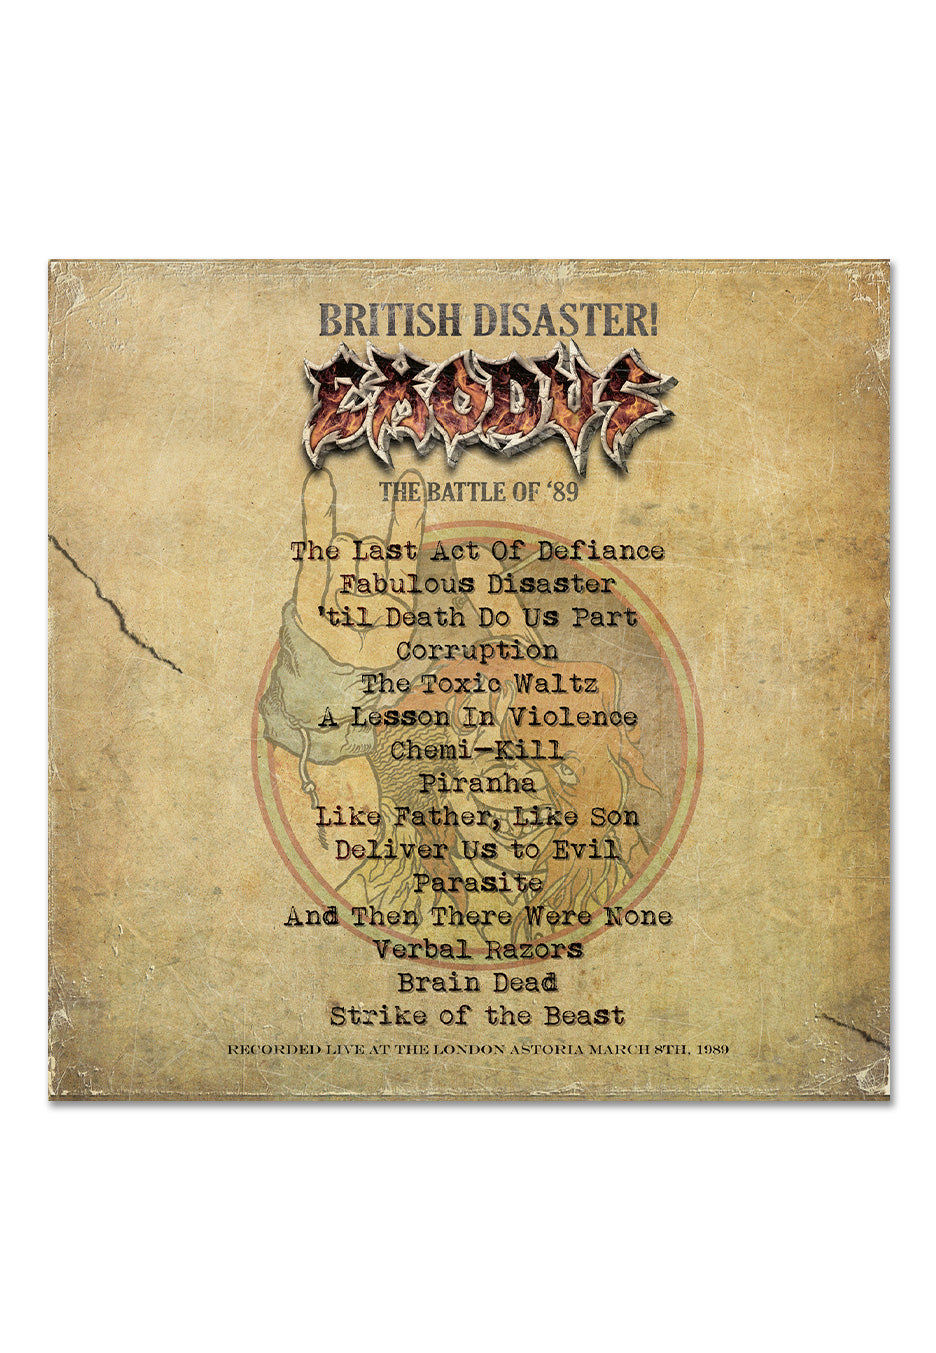 Exodus - British Disaster: The Battle Of '89 (Live At The Astoria) - CD